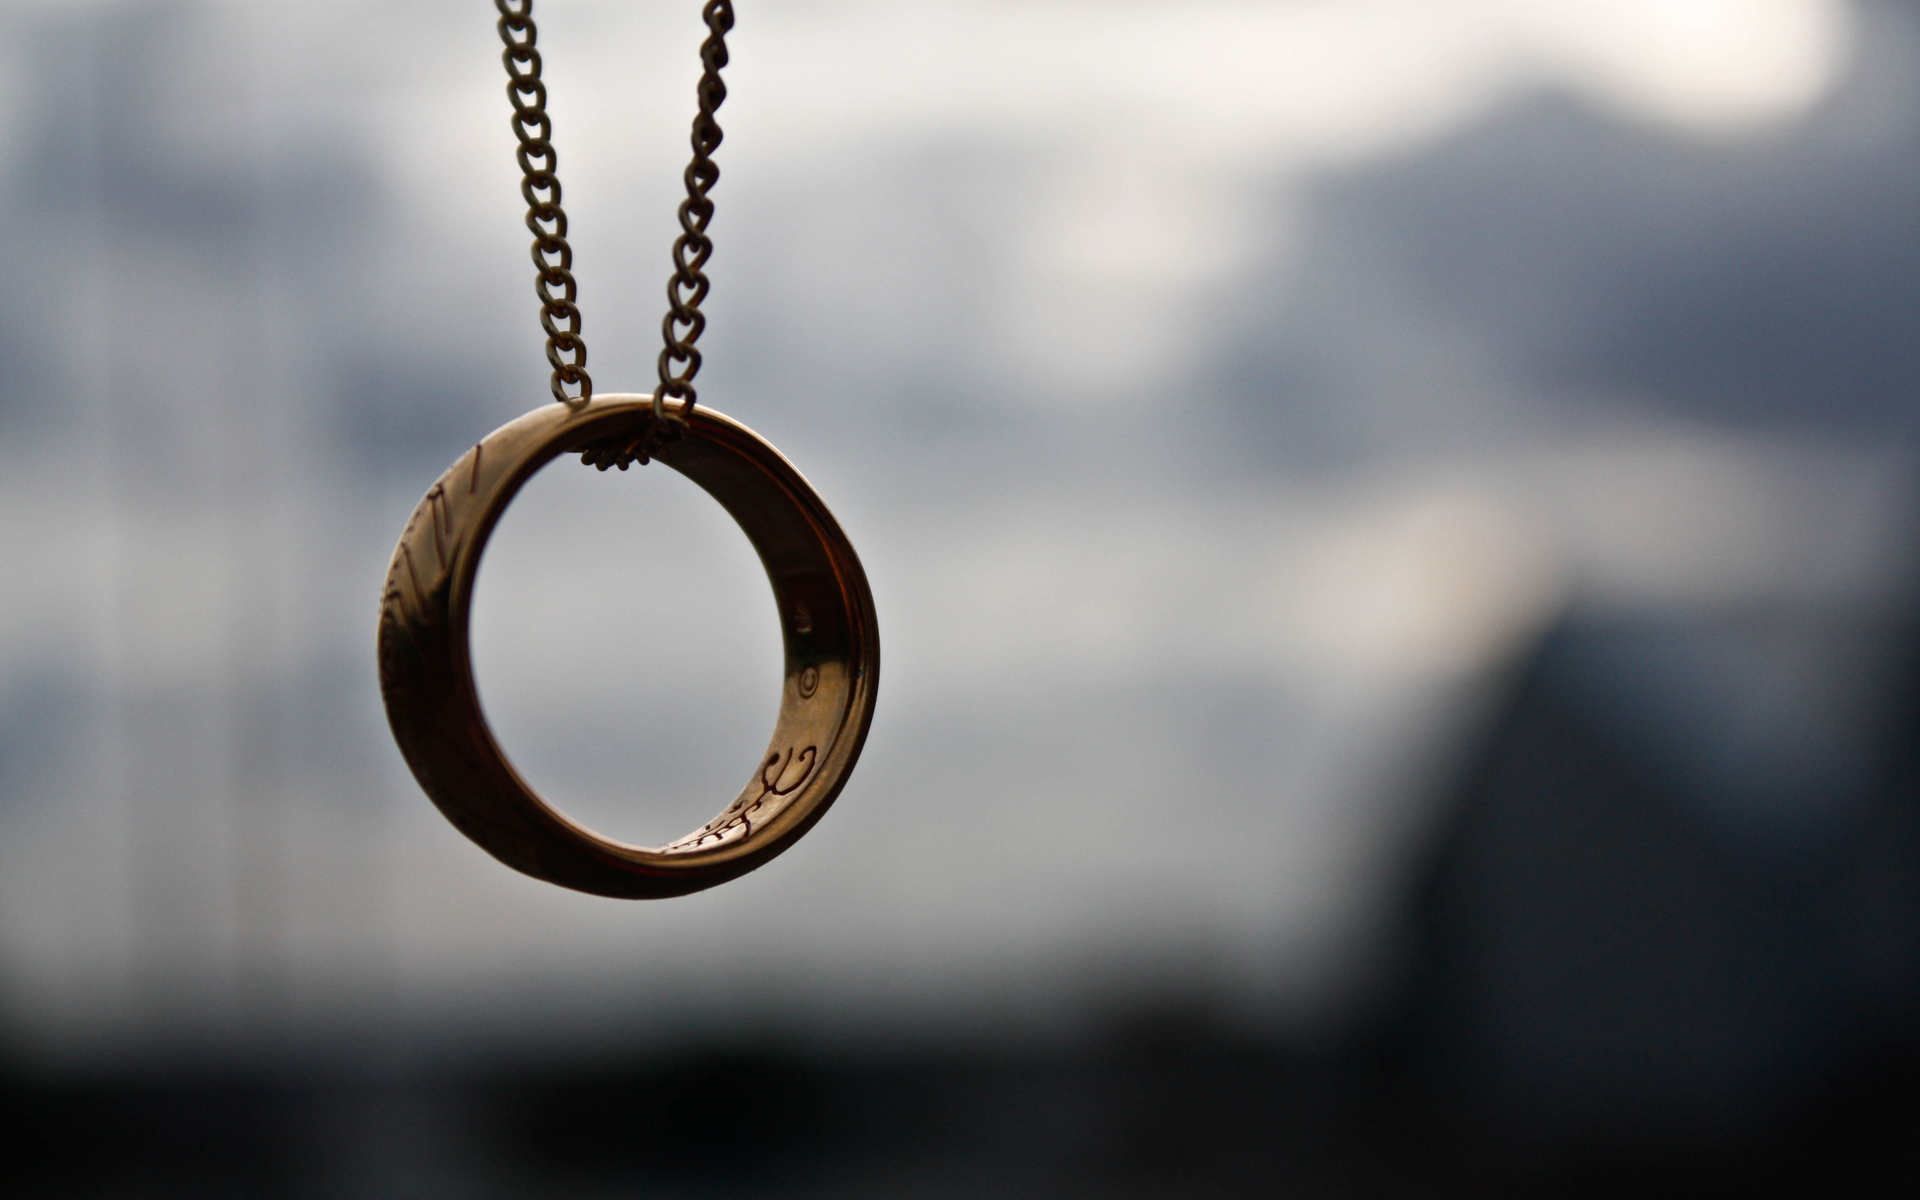 General 1920x1200 rings The Lord of the Rings bokeh necklace closeup movies books J. R. R. Tolkien The One Ring